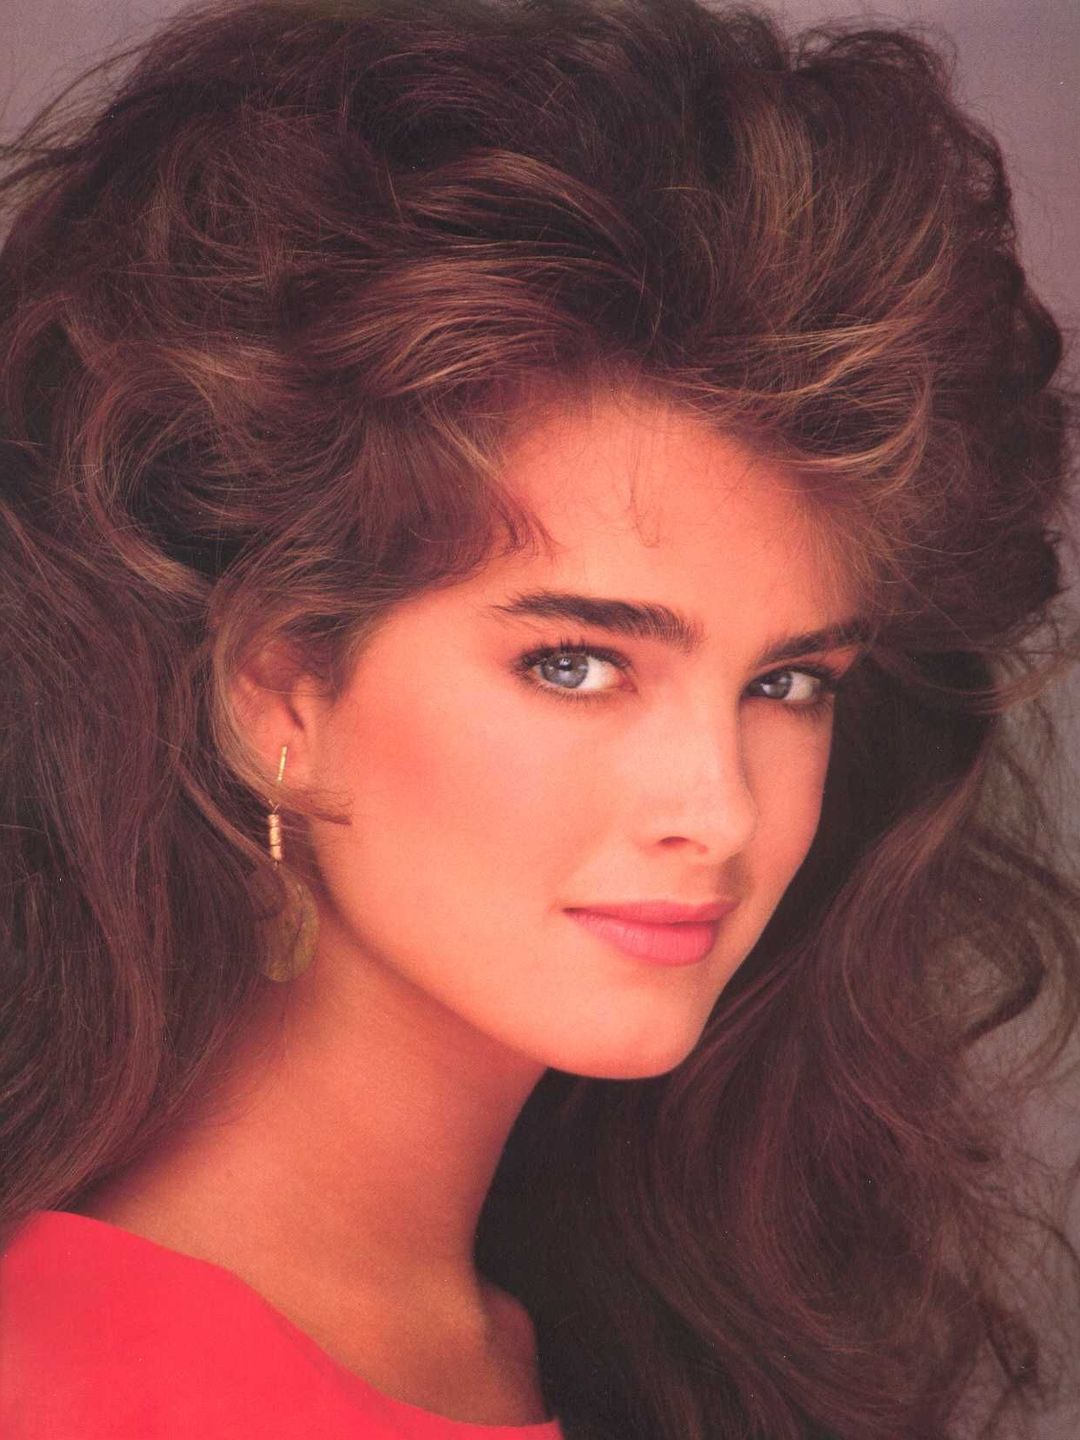 Brooke Shields young photos